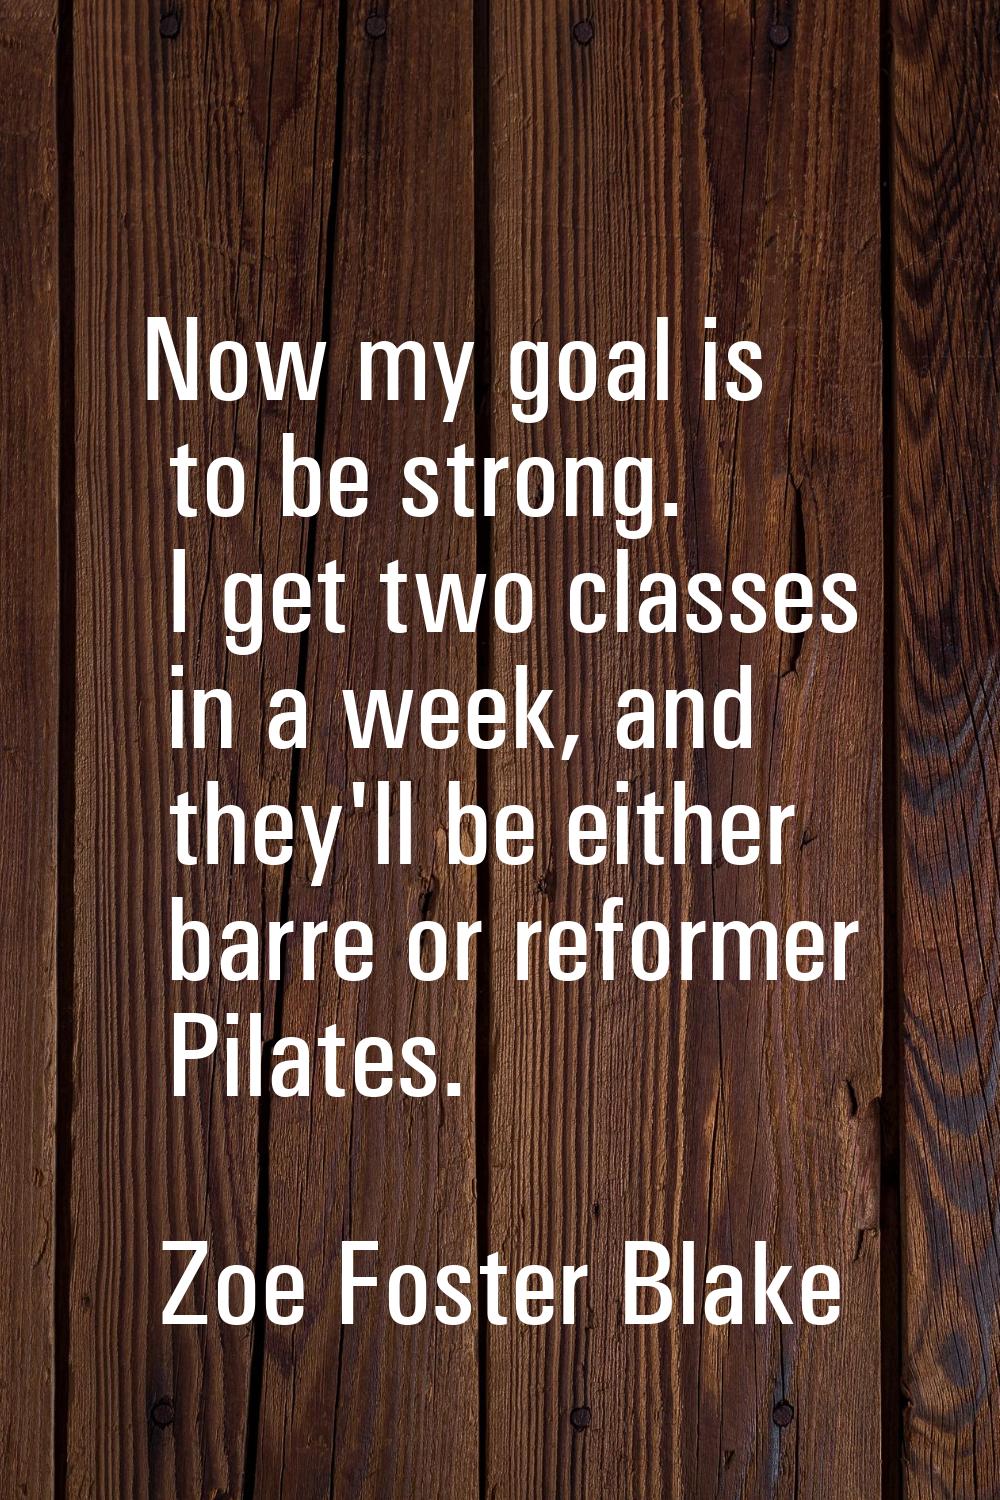 Now my goal is to be strong. I get two classes in a week, and they'll be either barre or reformer P